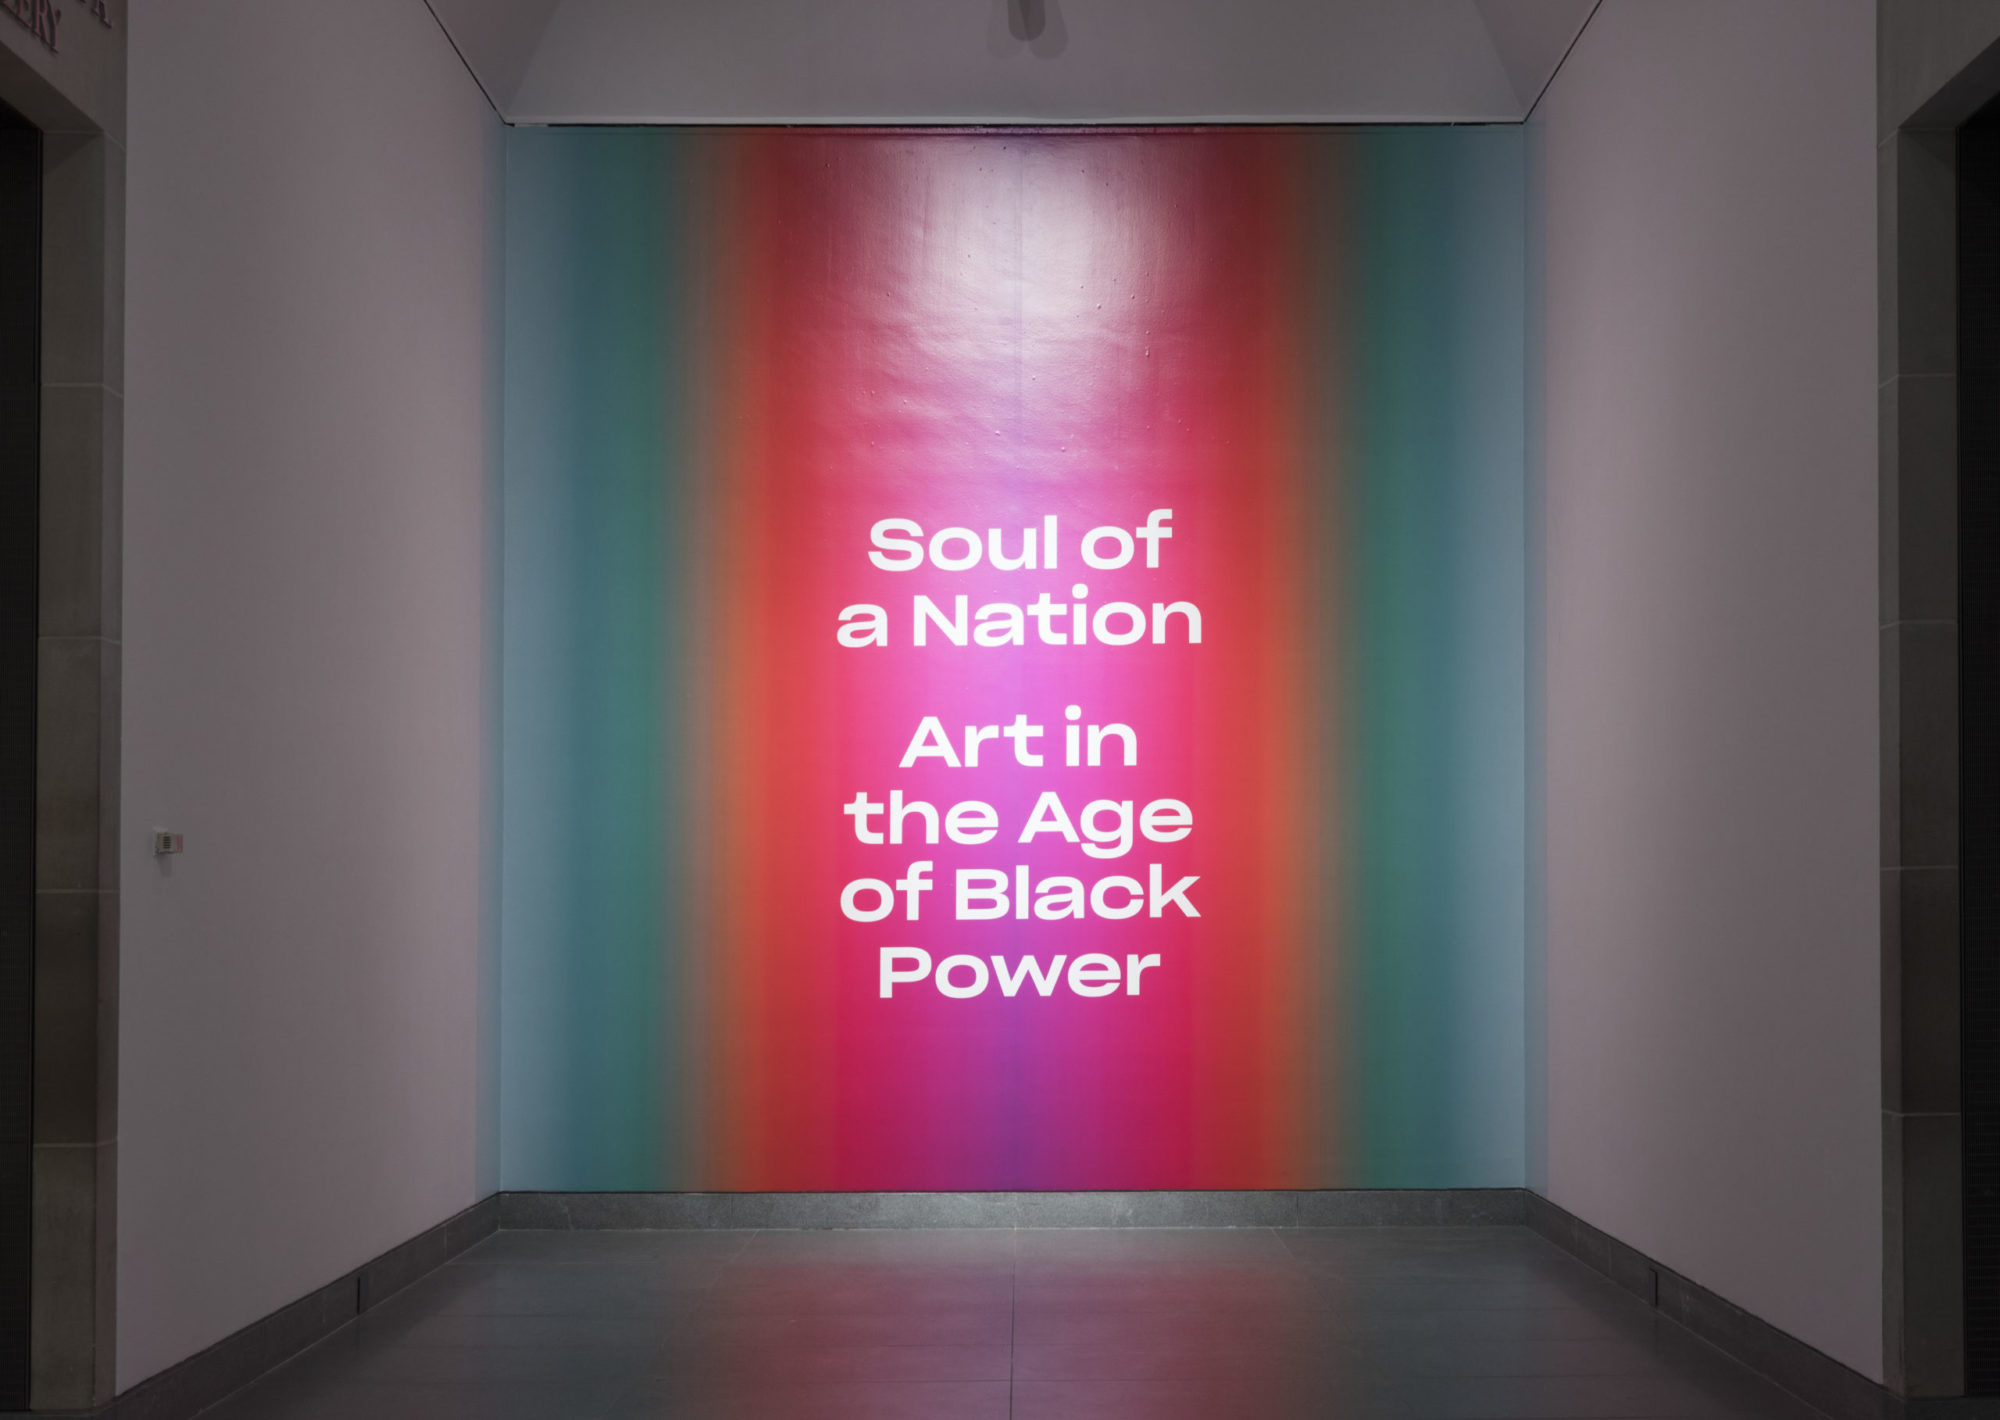 A wall spotlit reads 'Soul of a Nation: Art in the Age of Black Power' in white text on a teal, blue, orange and pink background